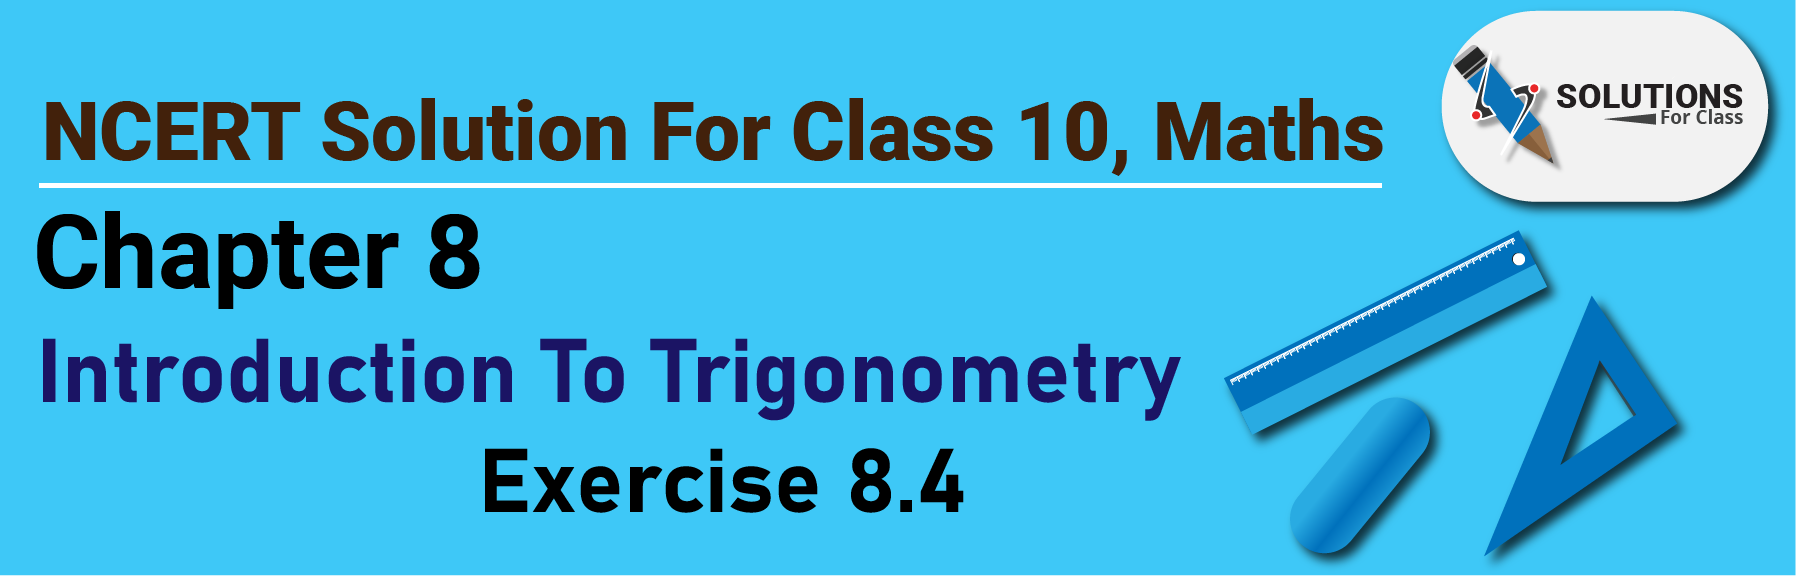 NCERT Solution For Class 10, Maths, Chapter 8, Introduction To Trigonometry, Ex. 8.4